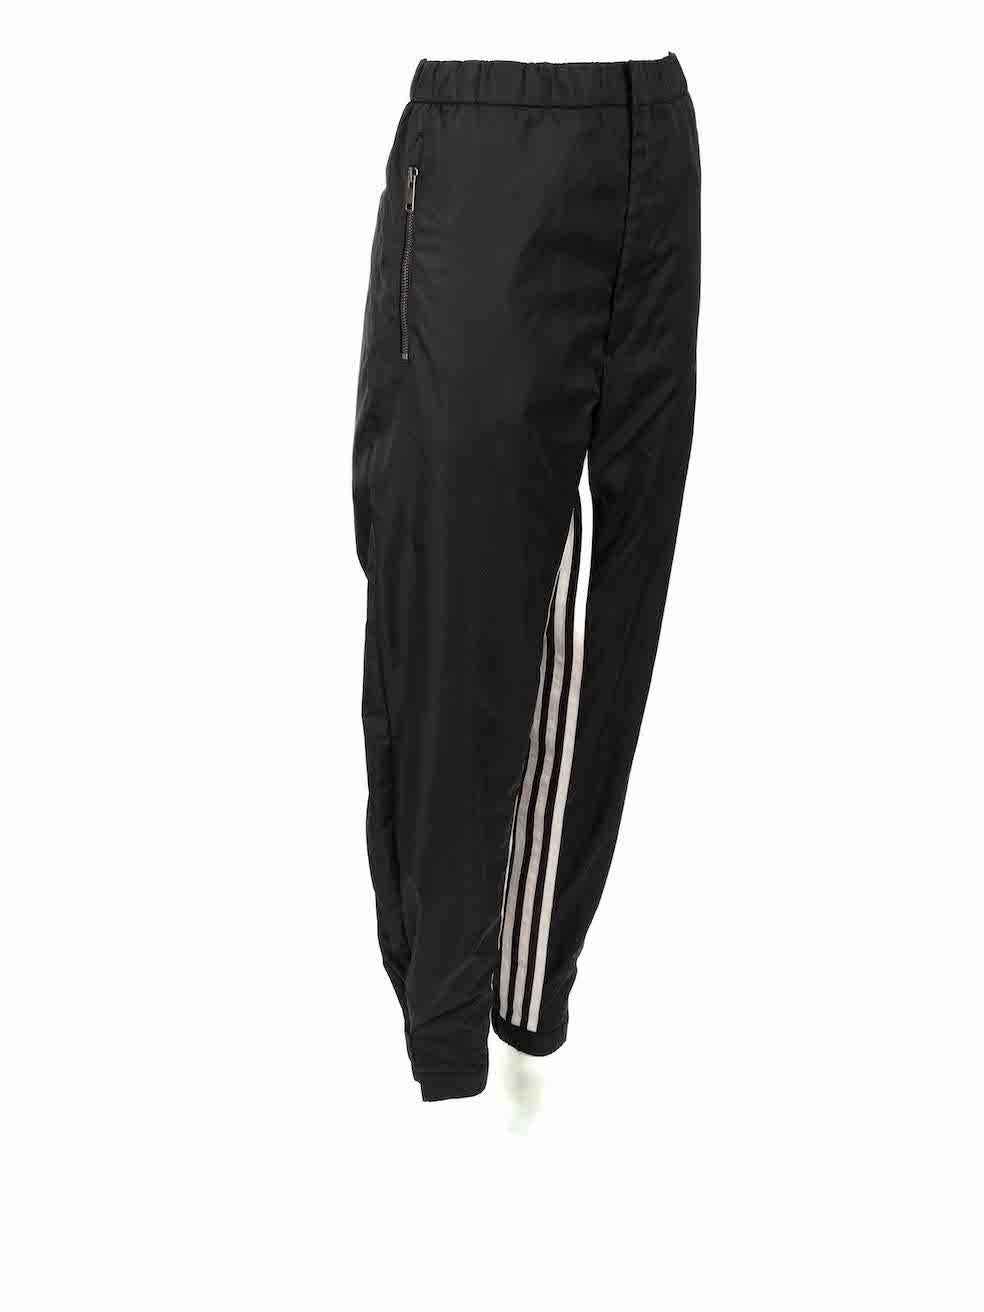 CONDITION is Very good. Hardly any visible wear to trousers is evident on this used Prada designer resale item.
 
 Details
 Black
 Re-nylon
 Track trousers
 High rise
 Front zip closure with clasp and button
 Elasticated waistband with drawstring
